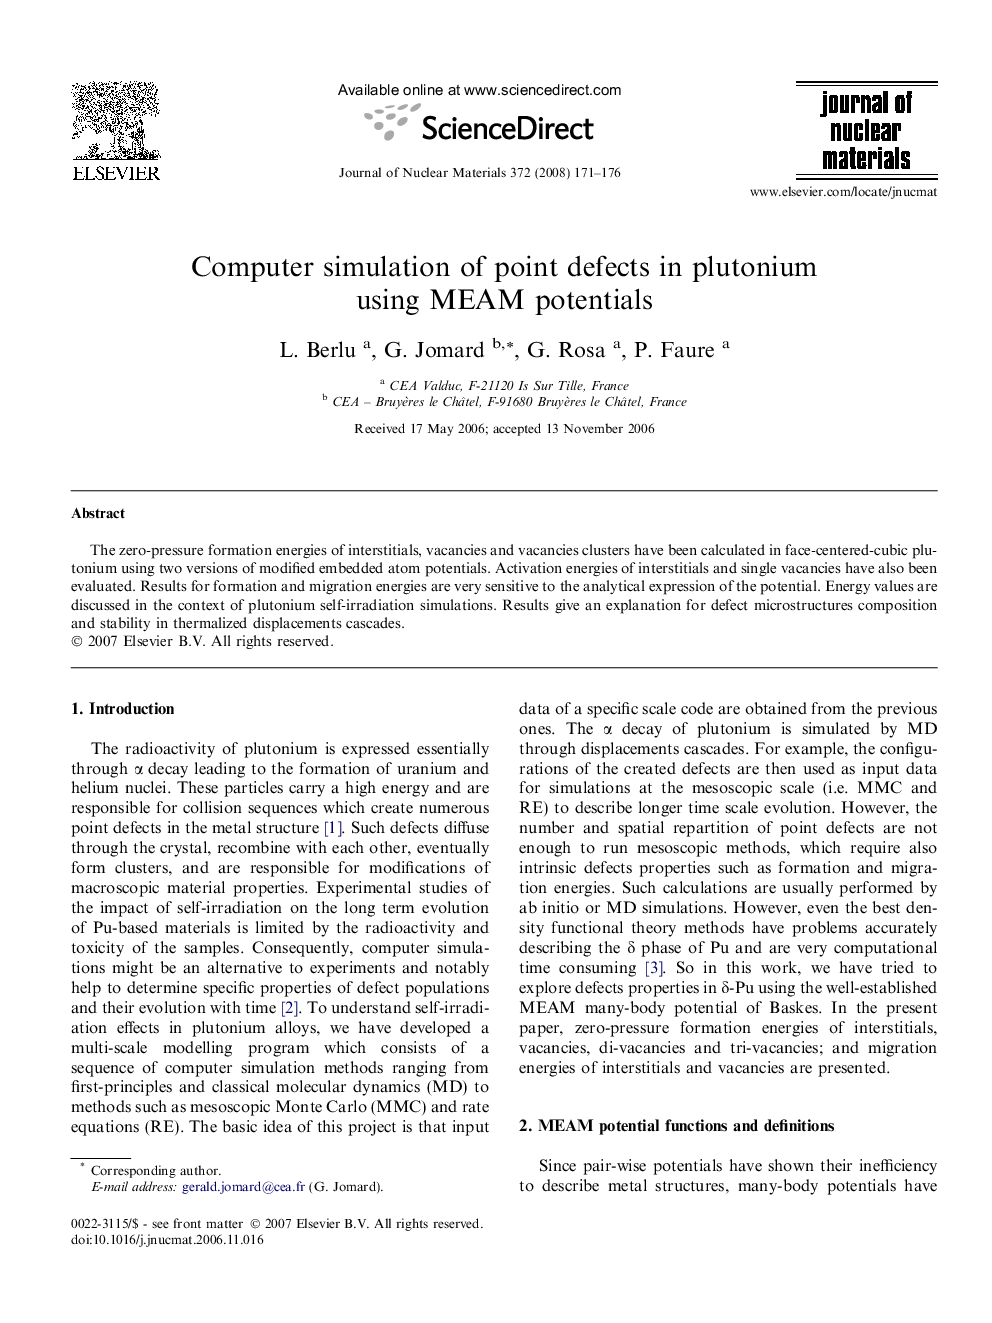 Computer simulation of point defects in plutonium using MEAM potentials